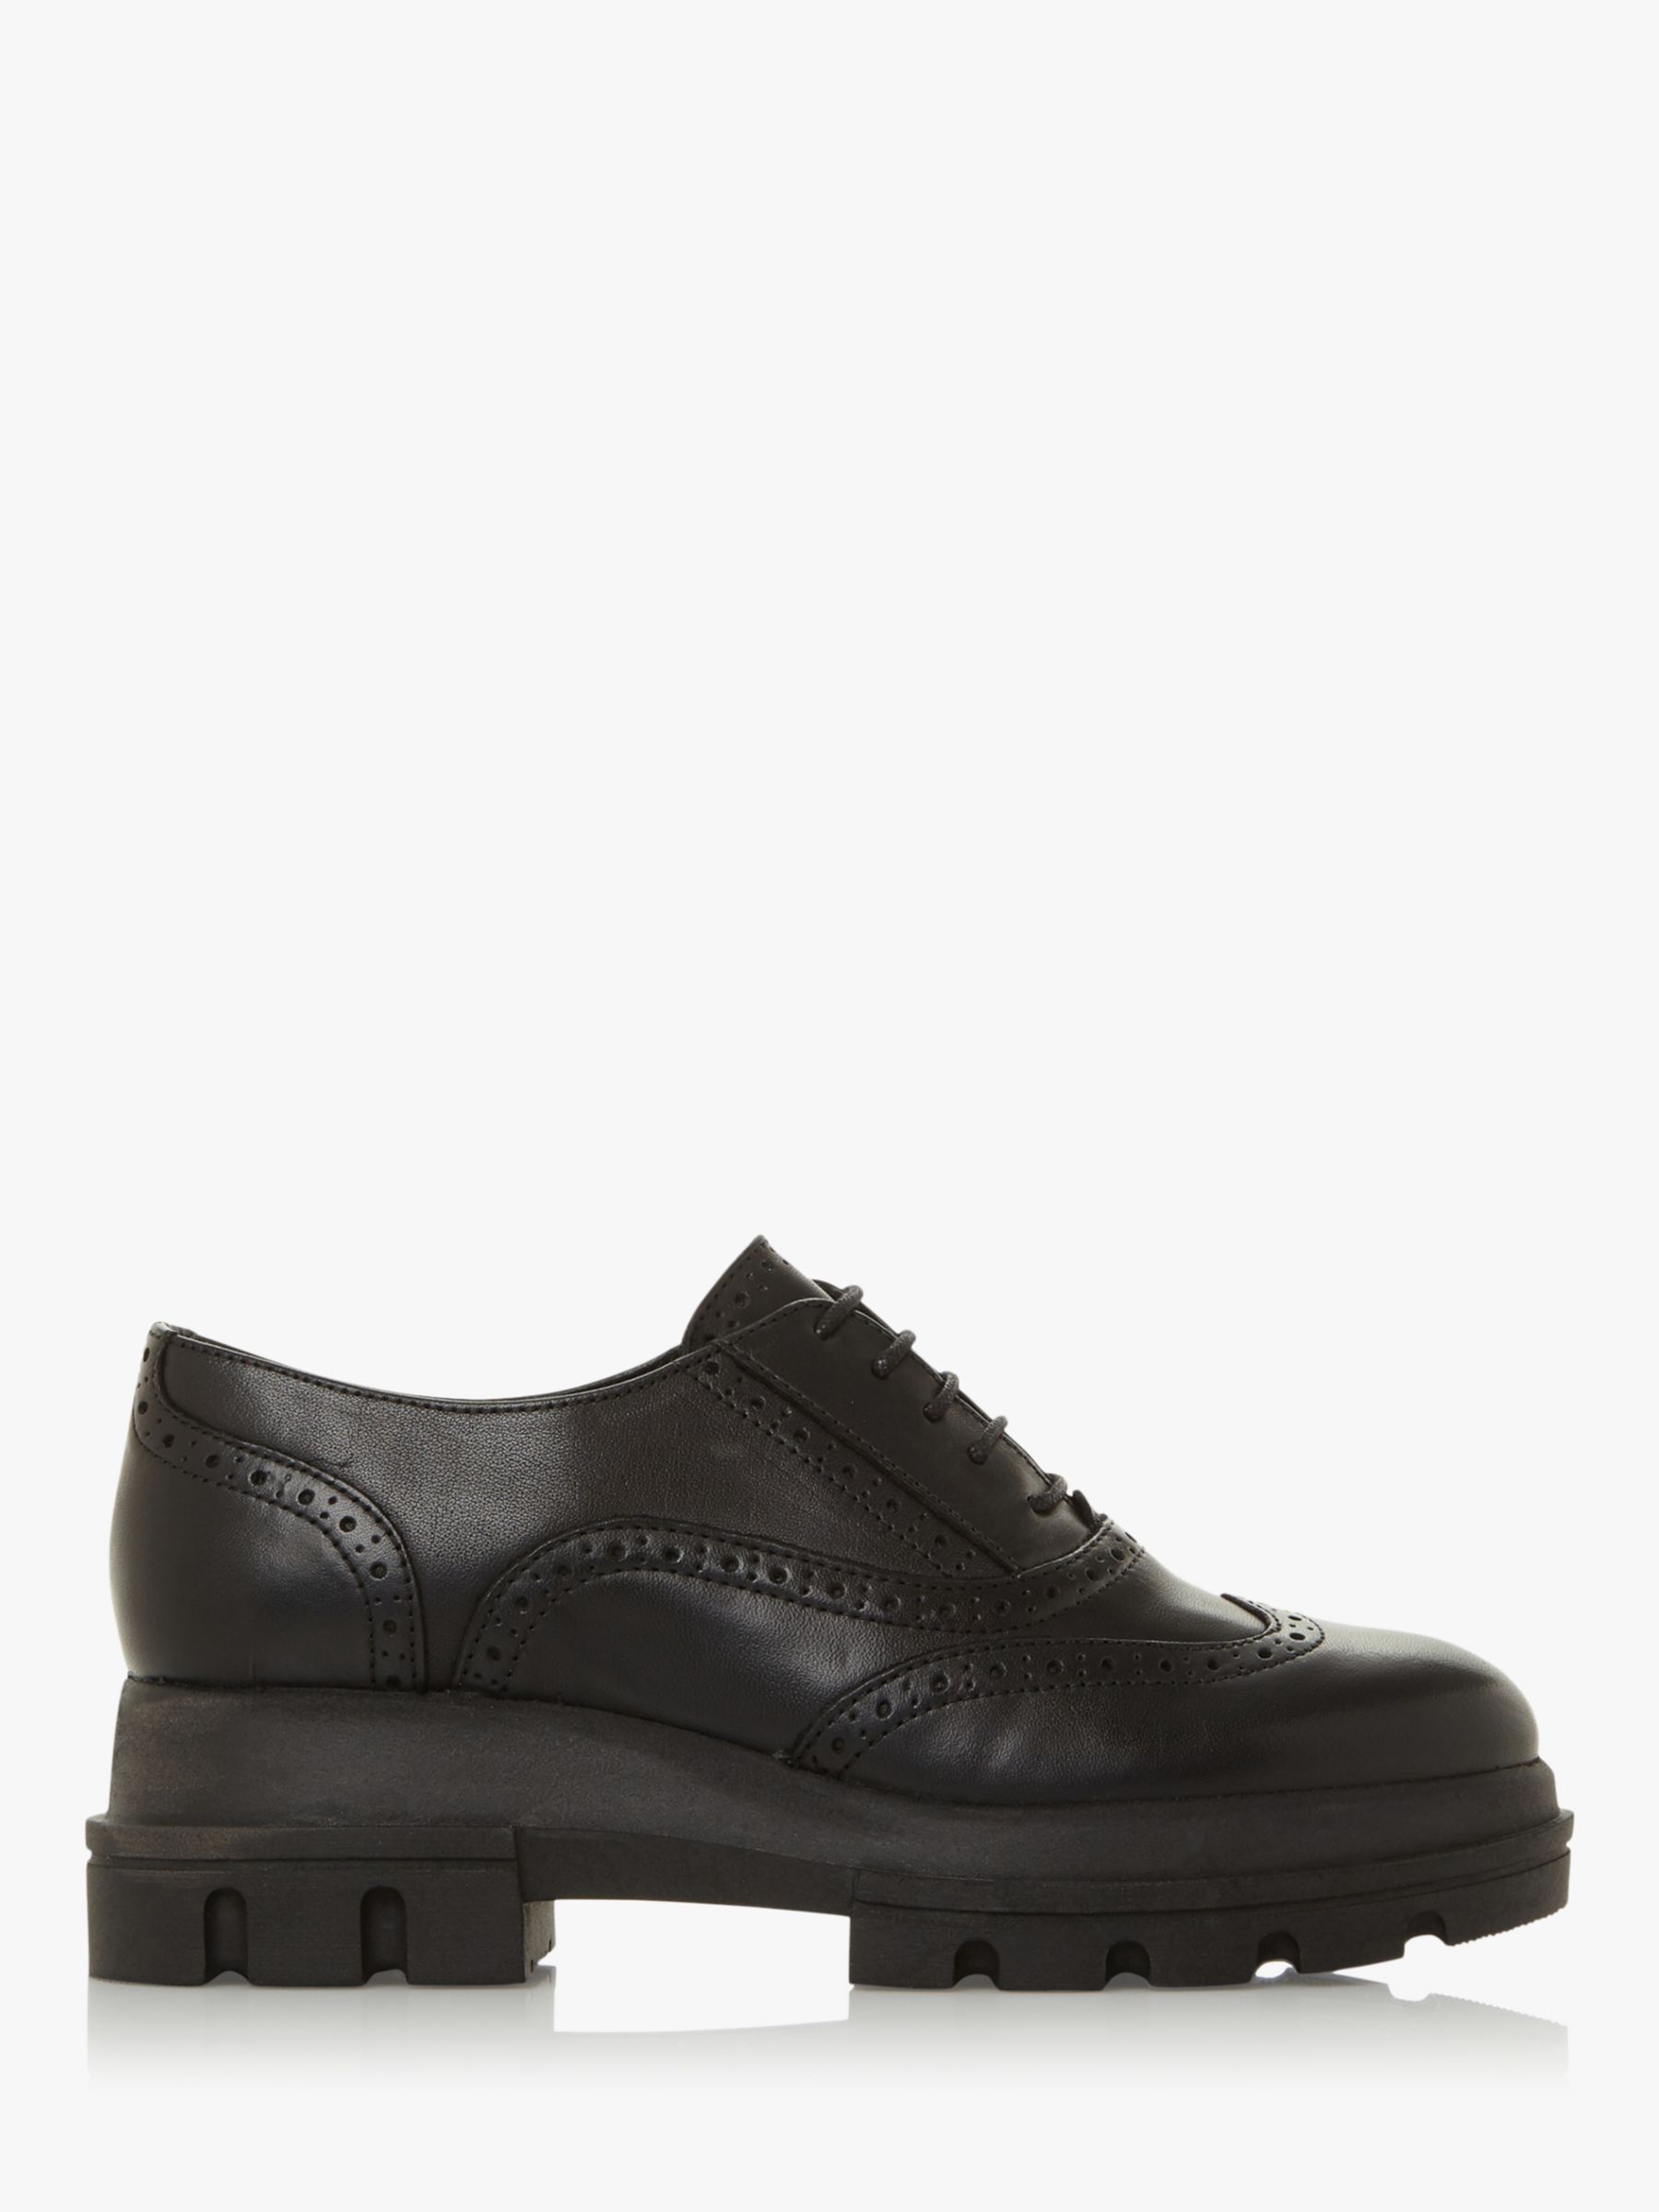 Dune Funk Chunky Sole Leather Brogues, Black